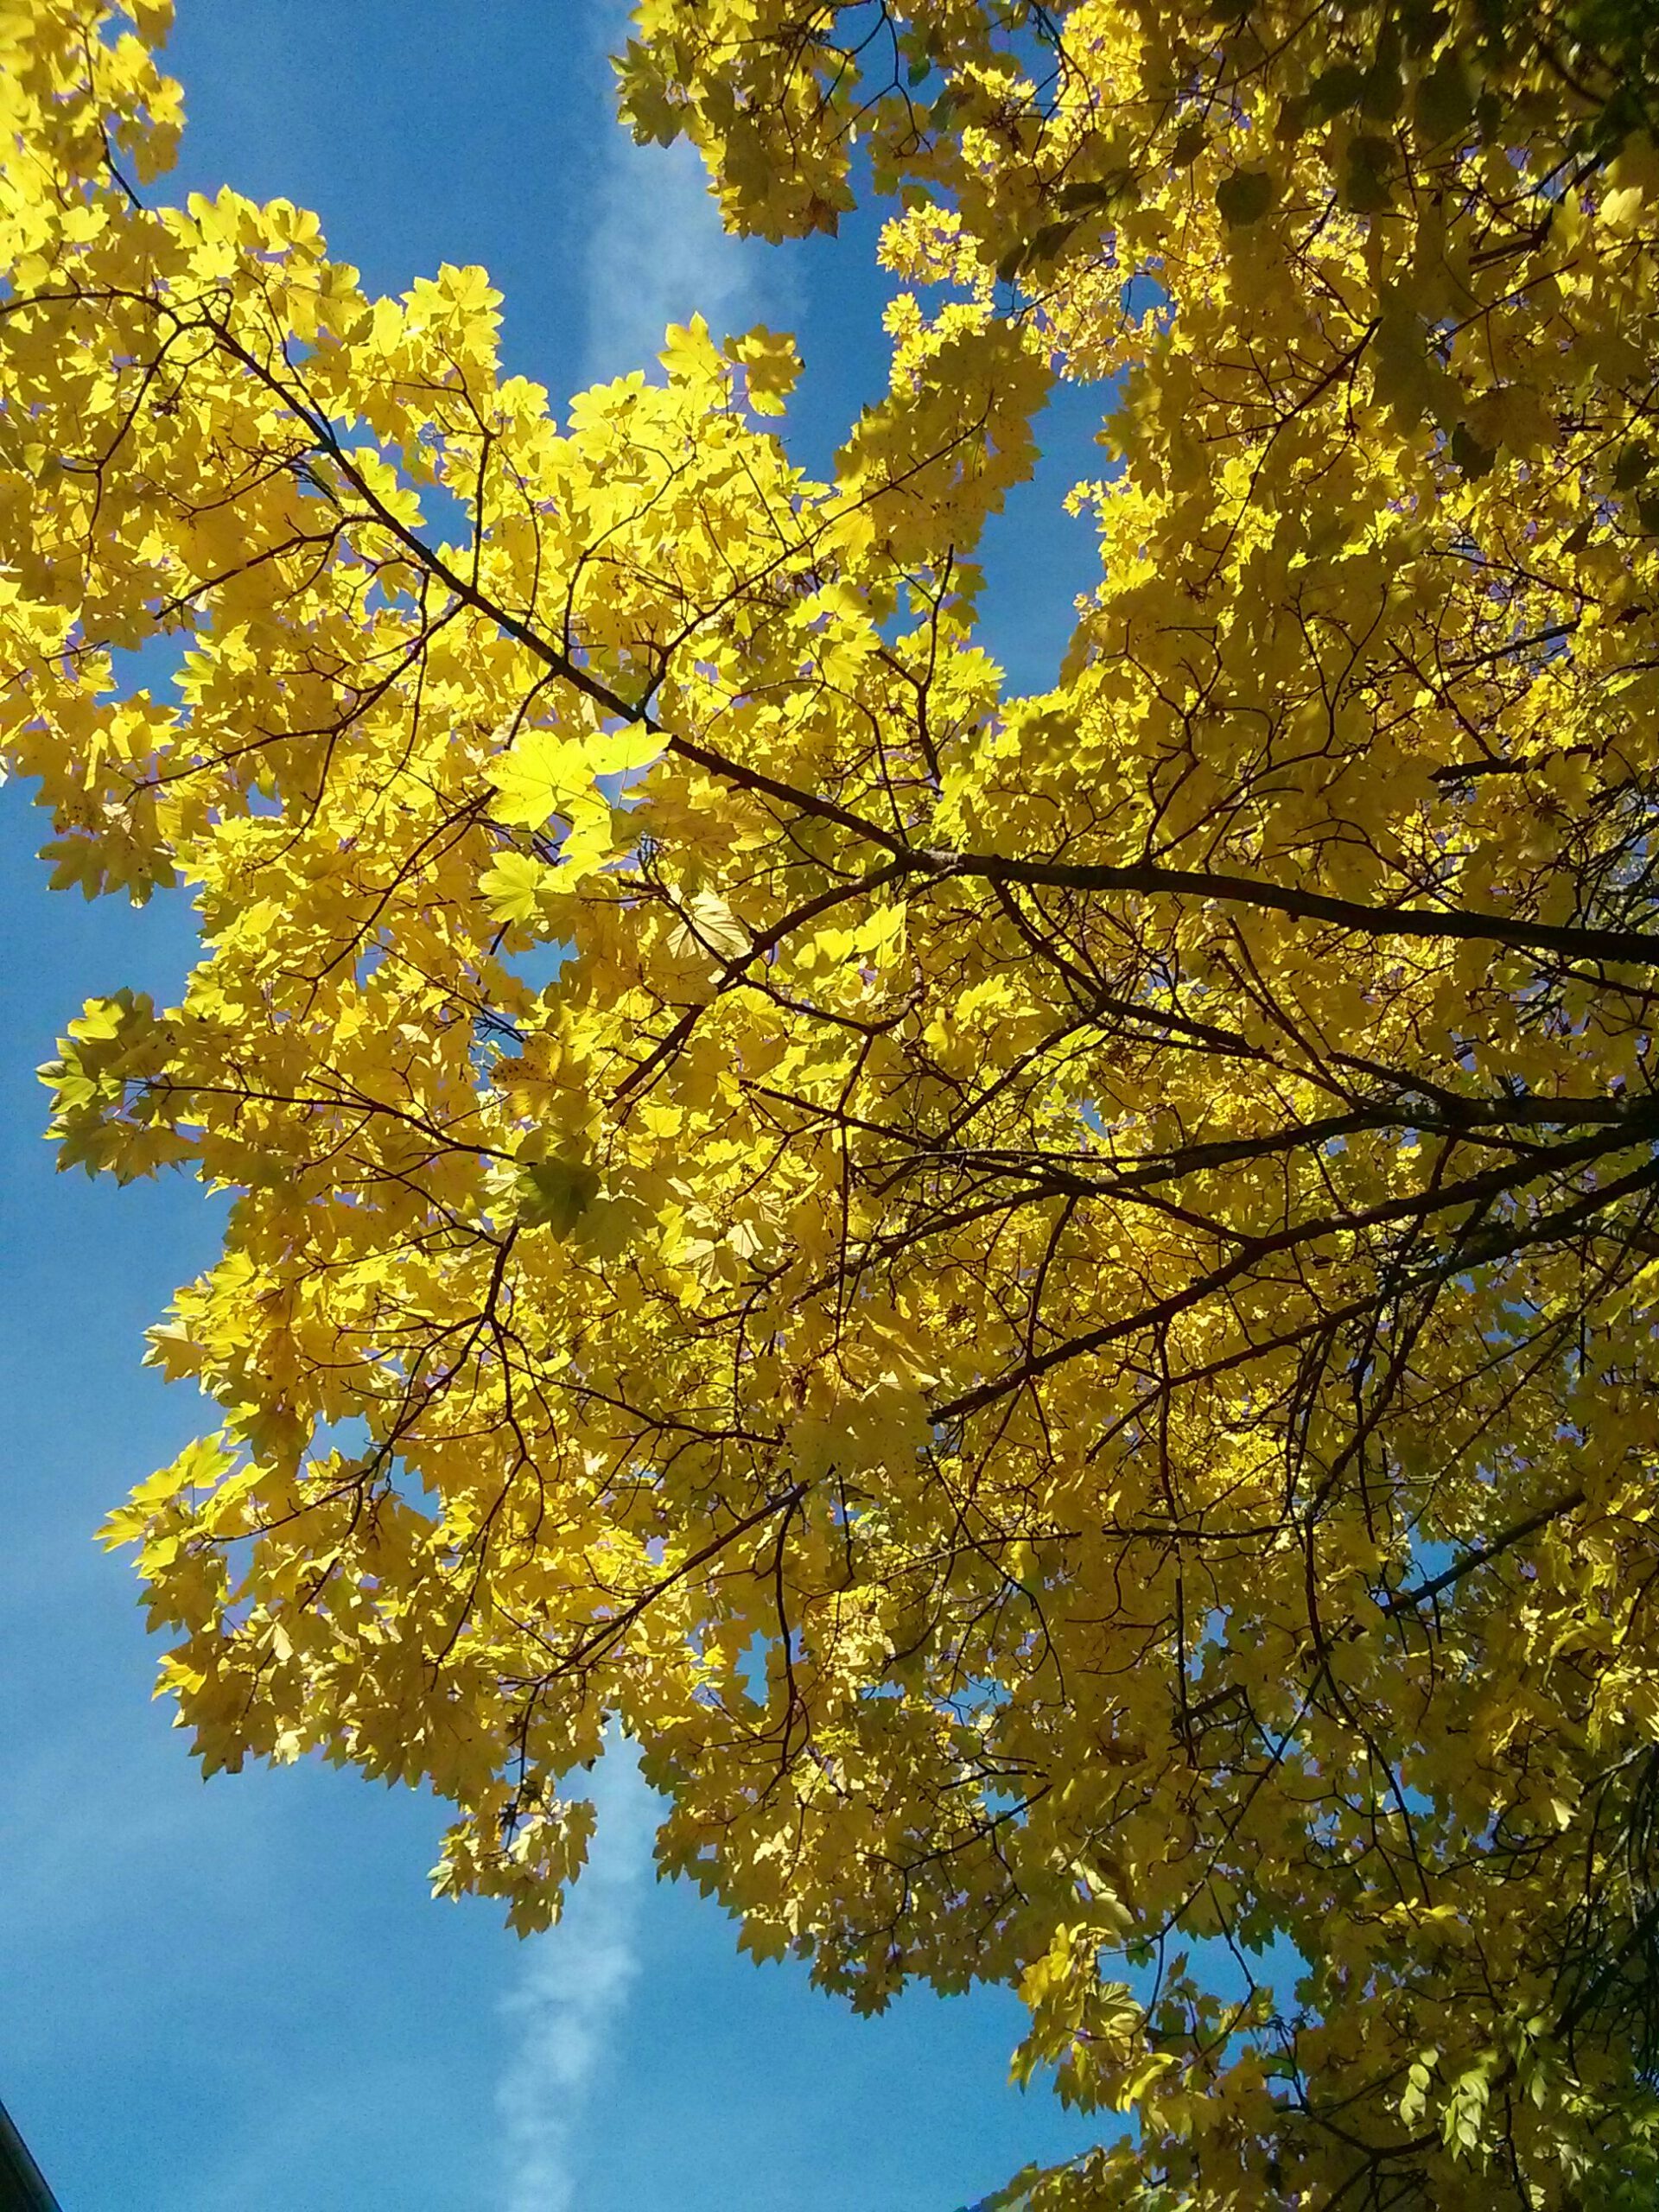 tree with stark yellow leaves before blue sky, for sun in our life, strength and hope in grief